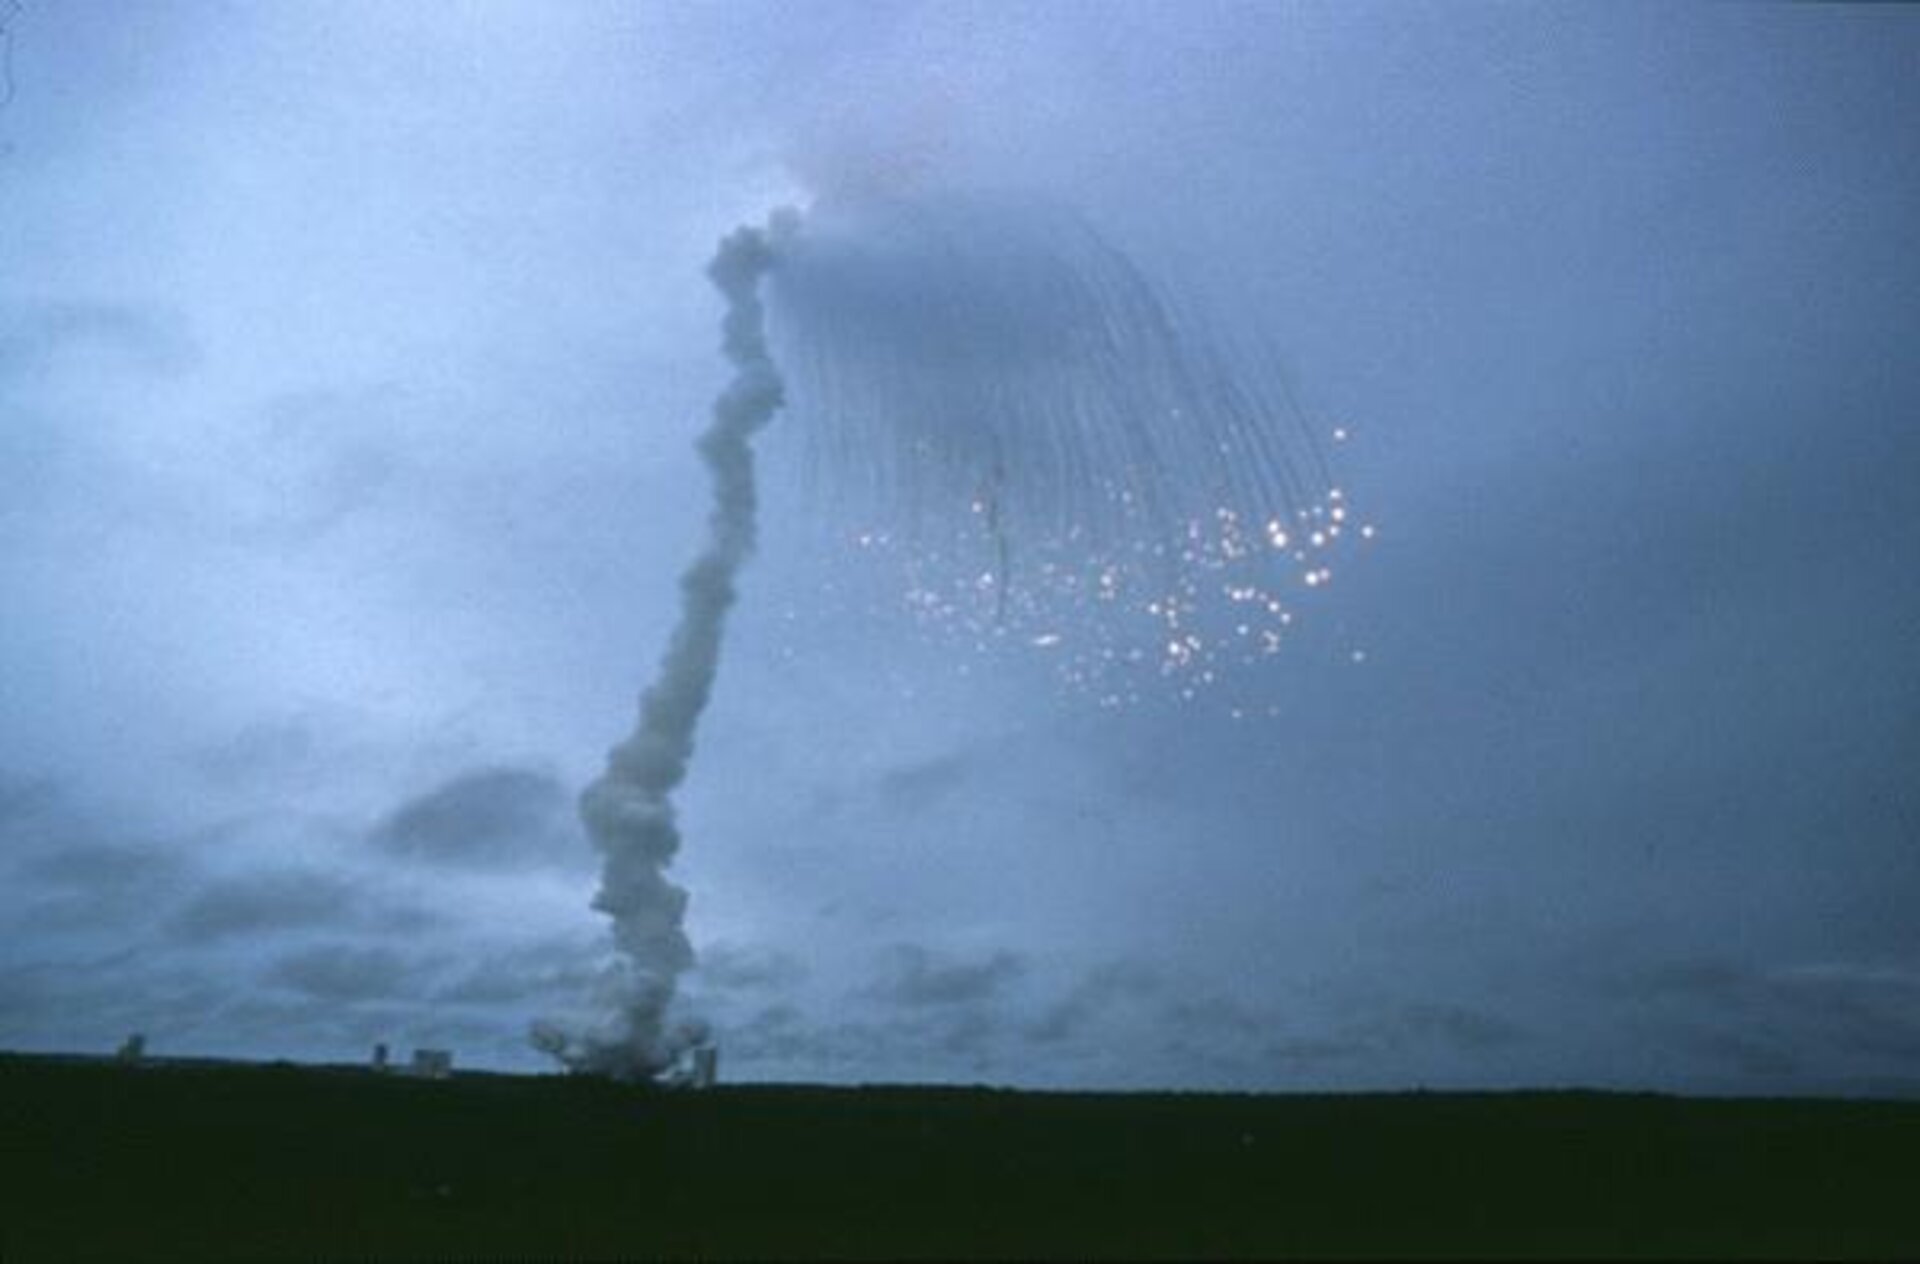 The spectacular explosion of the Ariane 5 flight in 1996, caused by a software bug…